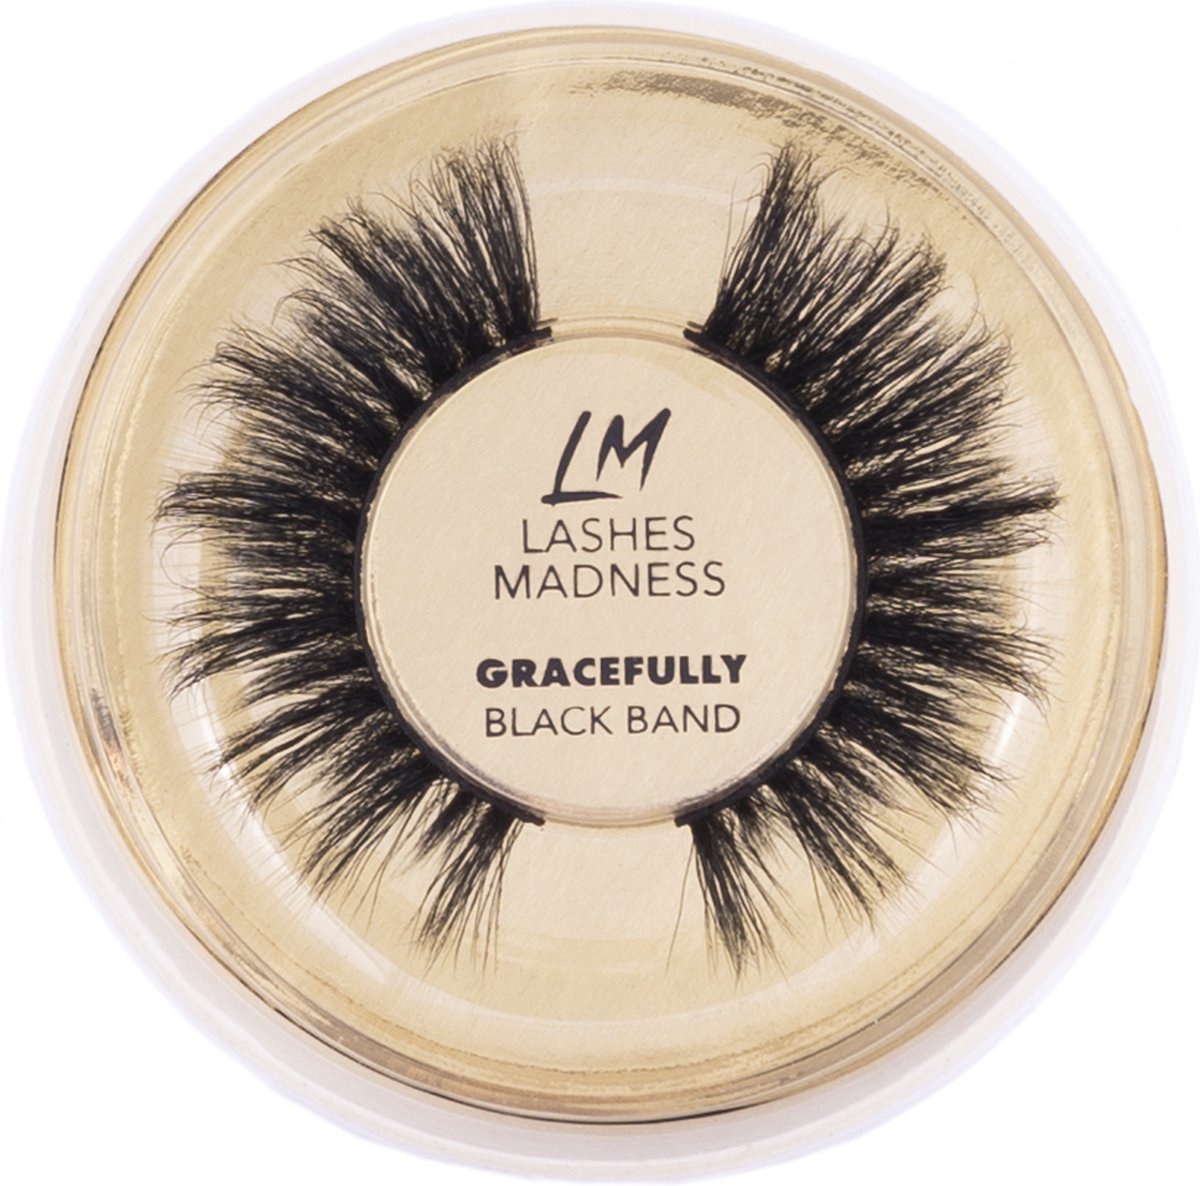 Lashes Madness - GRACEFULLY - Black Band - Vegan Mink Lashes - Wimpers - Valse Wimpers - Eyelashes - Luxe Wimpers